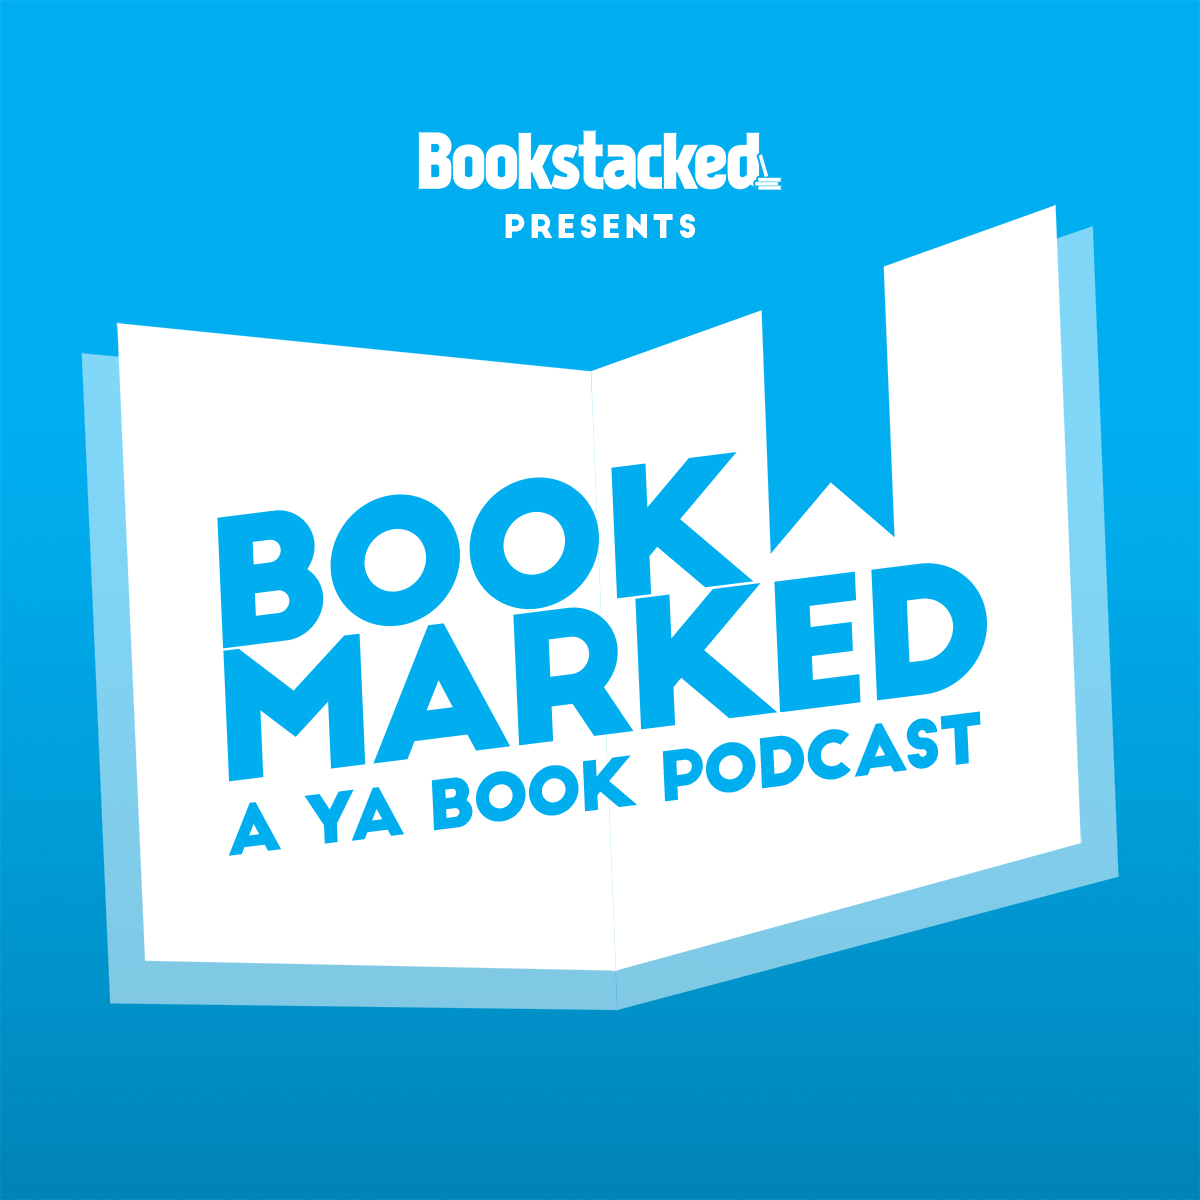 Bookmarked: A YA Book Podcast